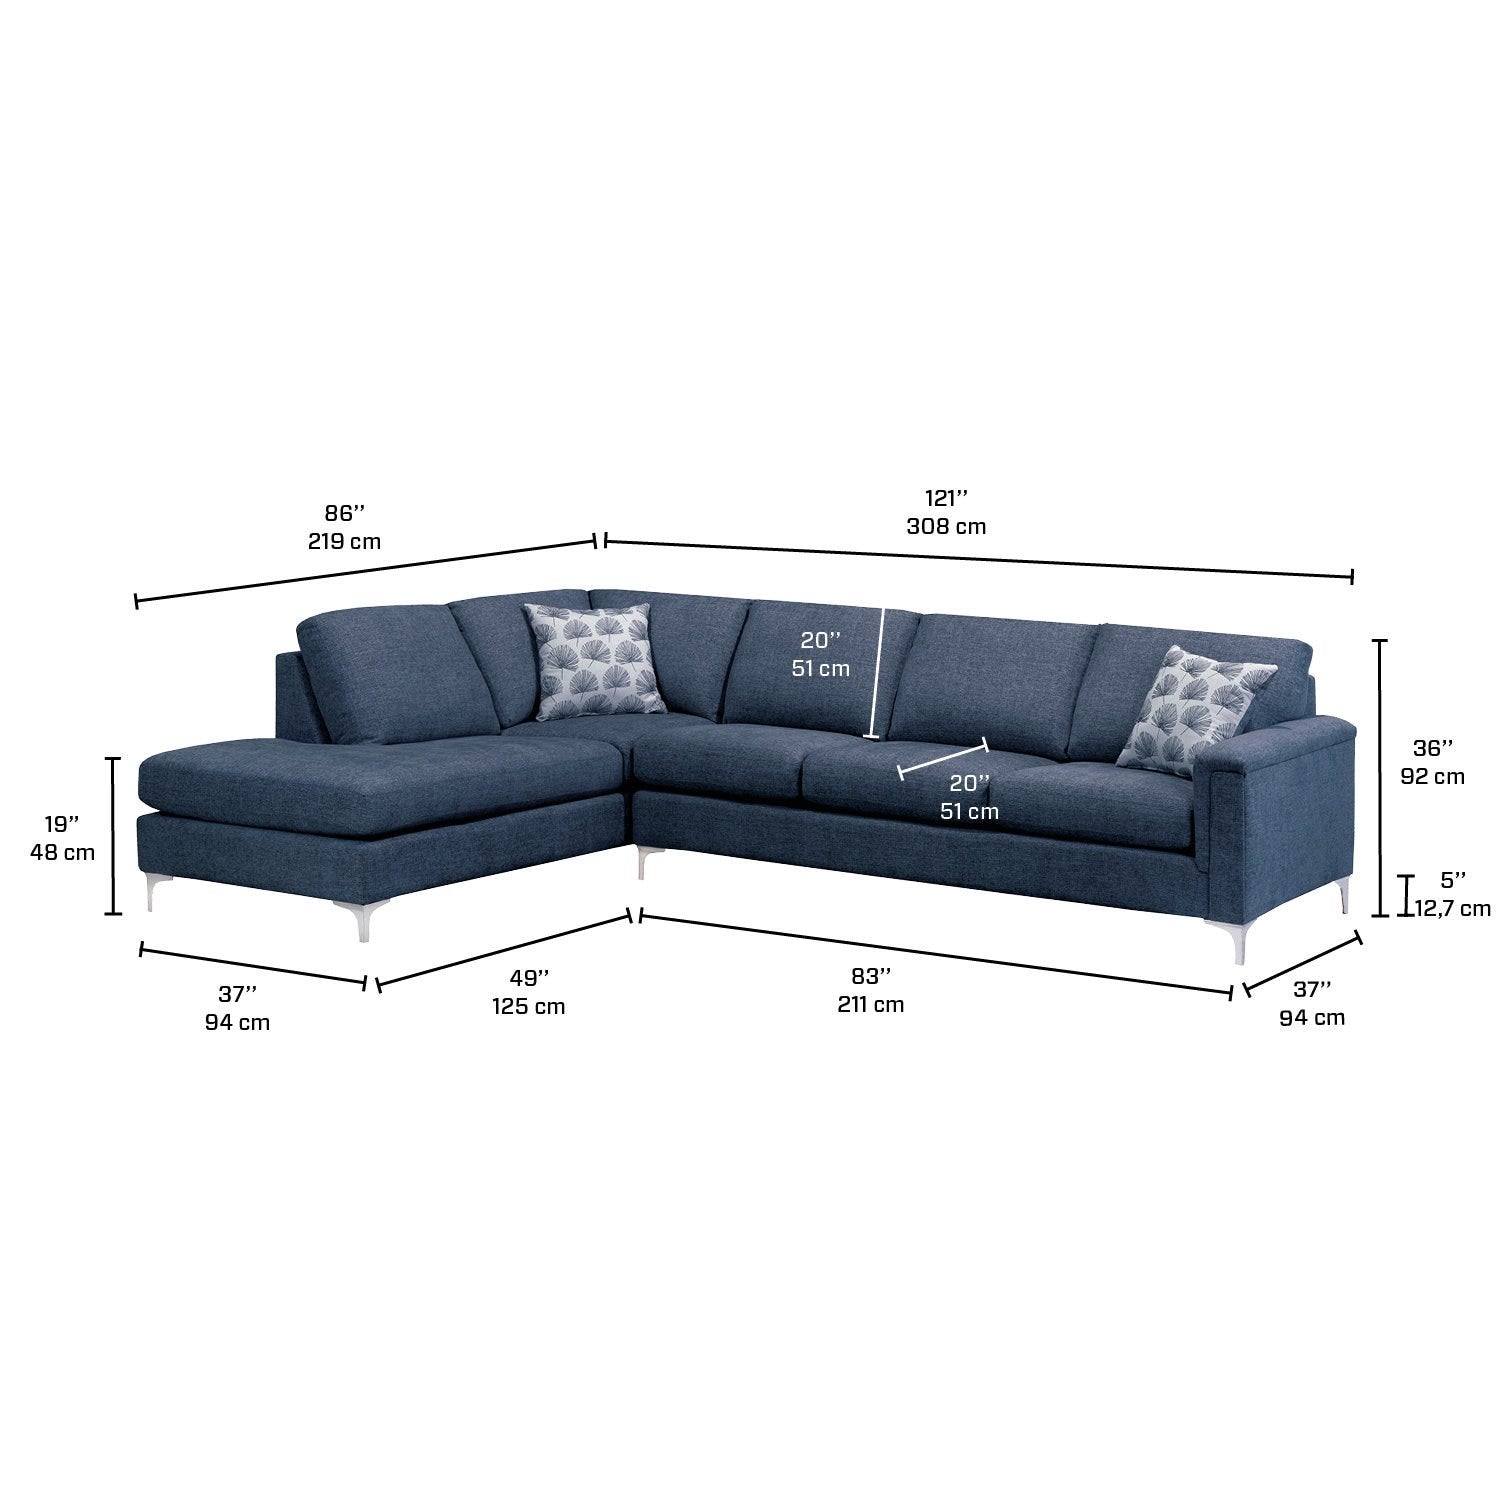 Wholesale Sofa Waterproof & Fabric - Various Colours - Sizes